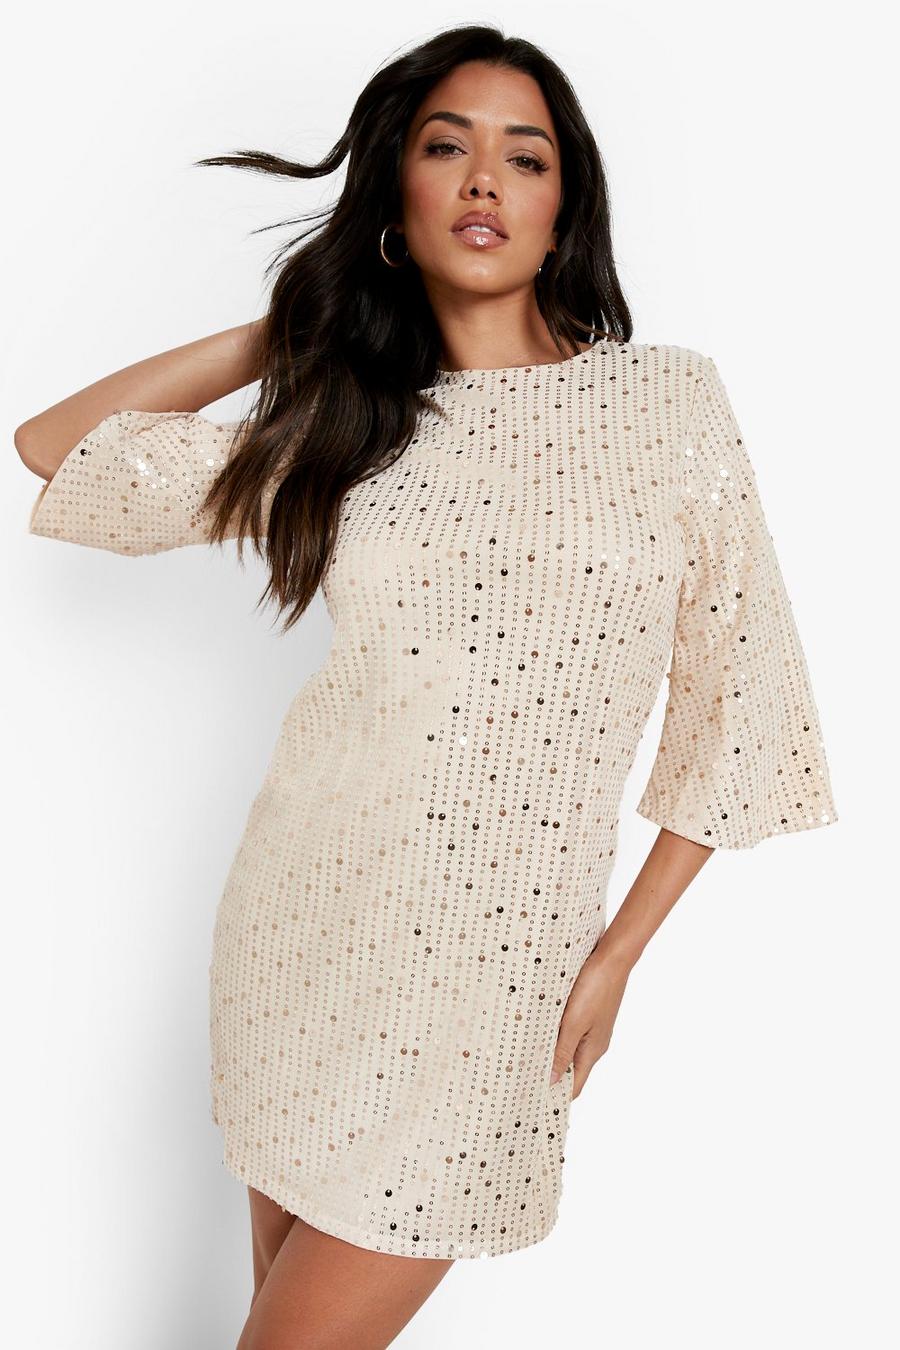 Rose gold metallic Sequin 3/4 Sleeve Shift Party Dress